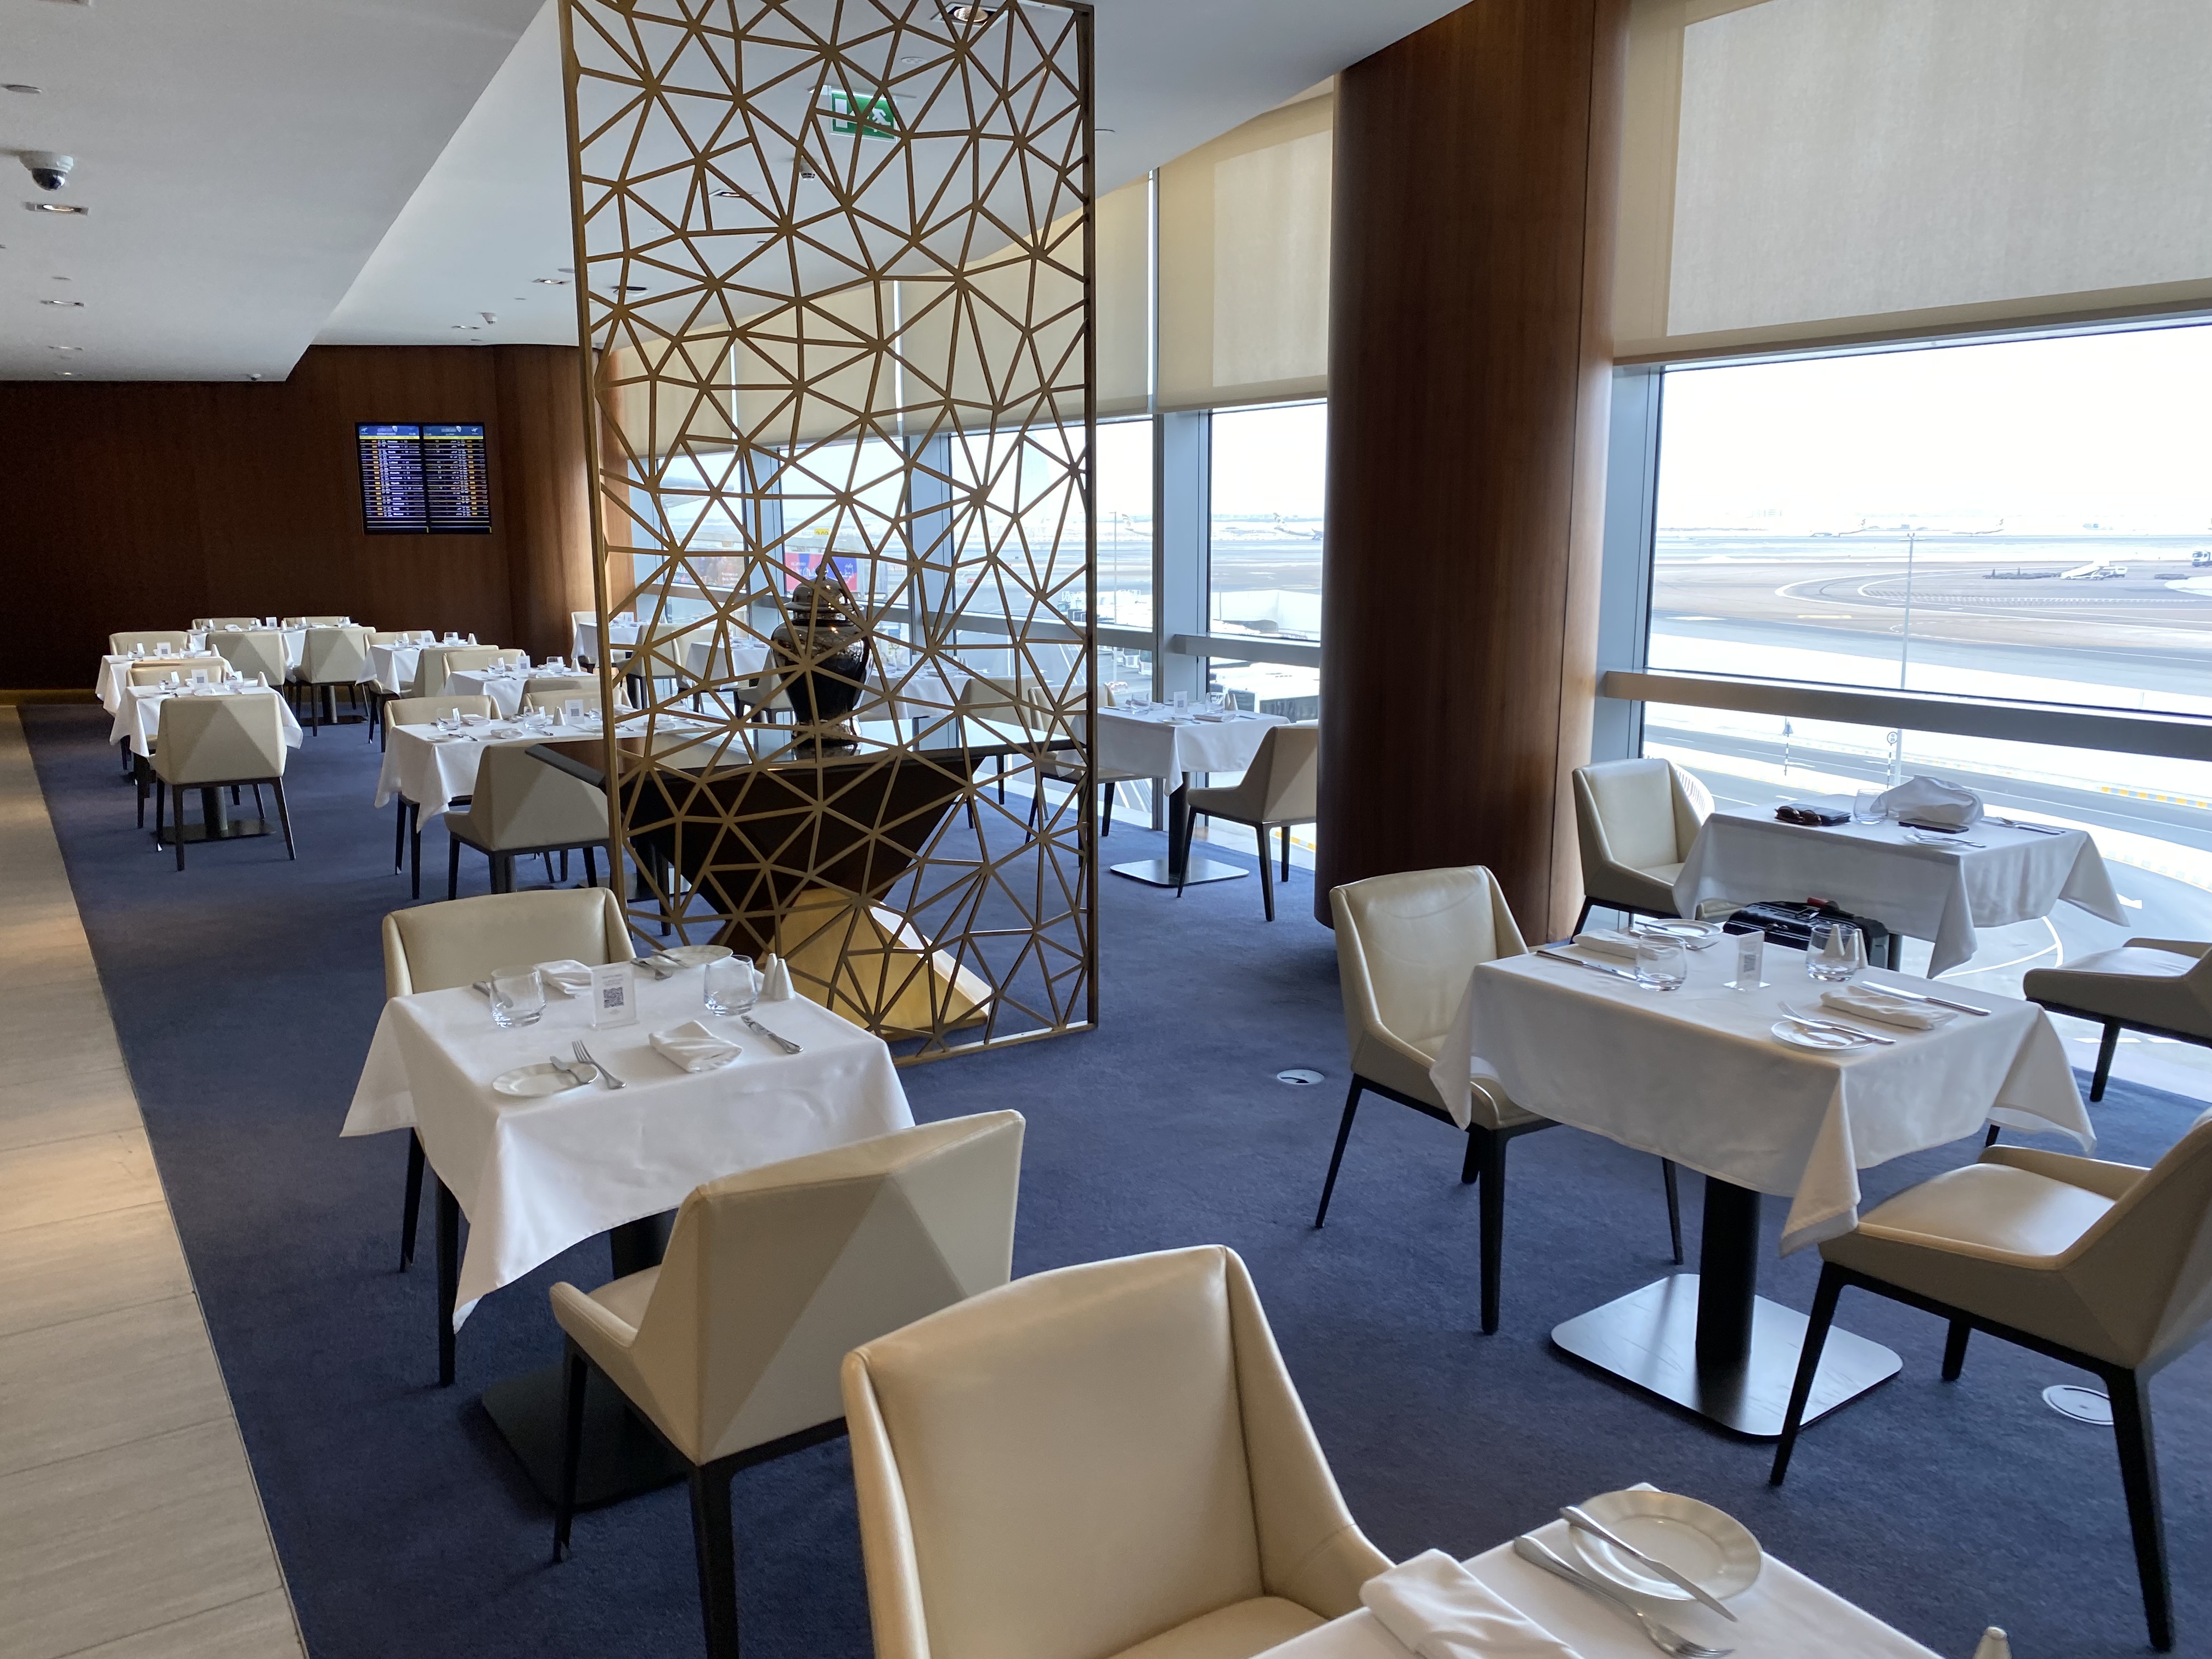 Etihad Airways First Class Lounge (AUH) - Dining Room